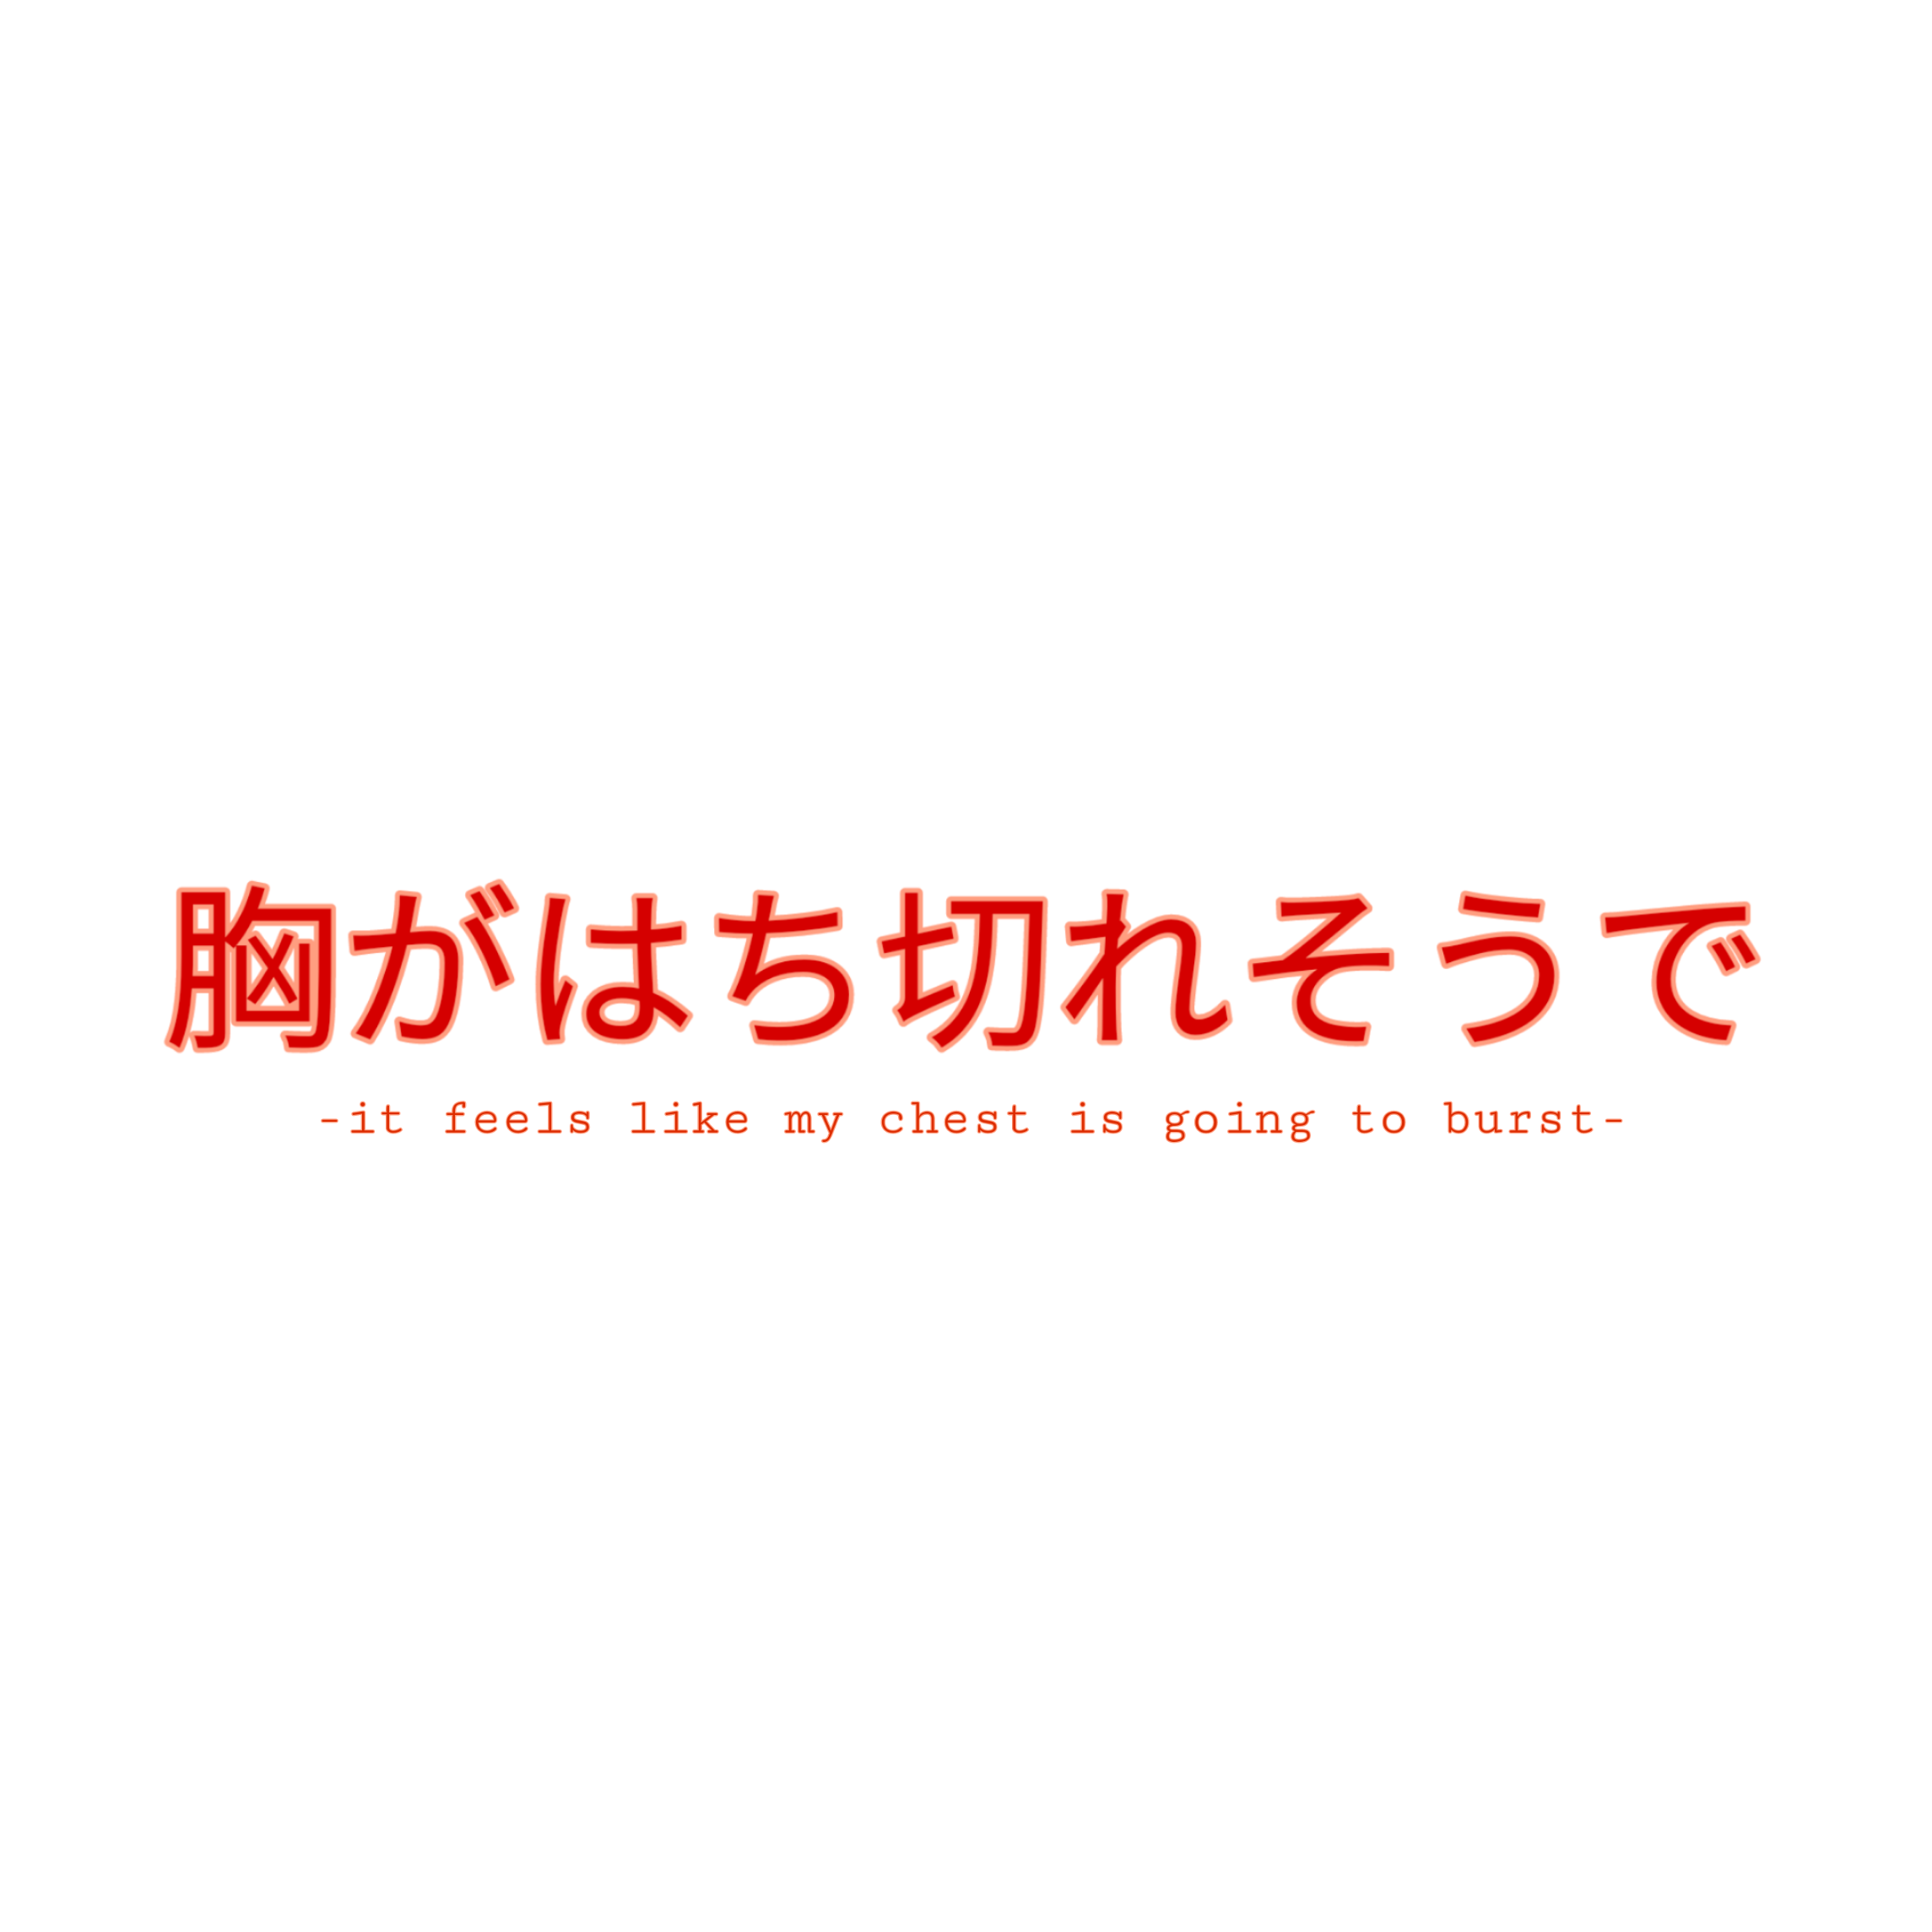 Japanese Aesthetic Quotes PNG HD Quality